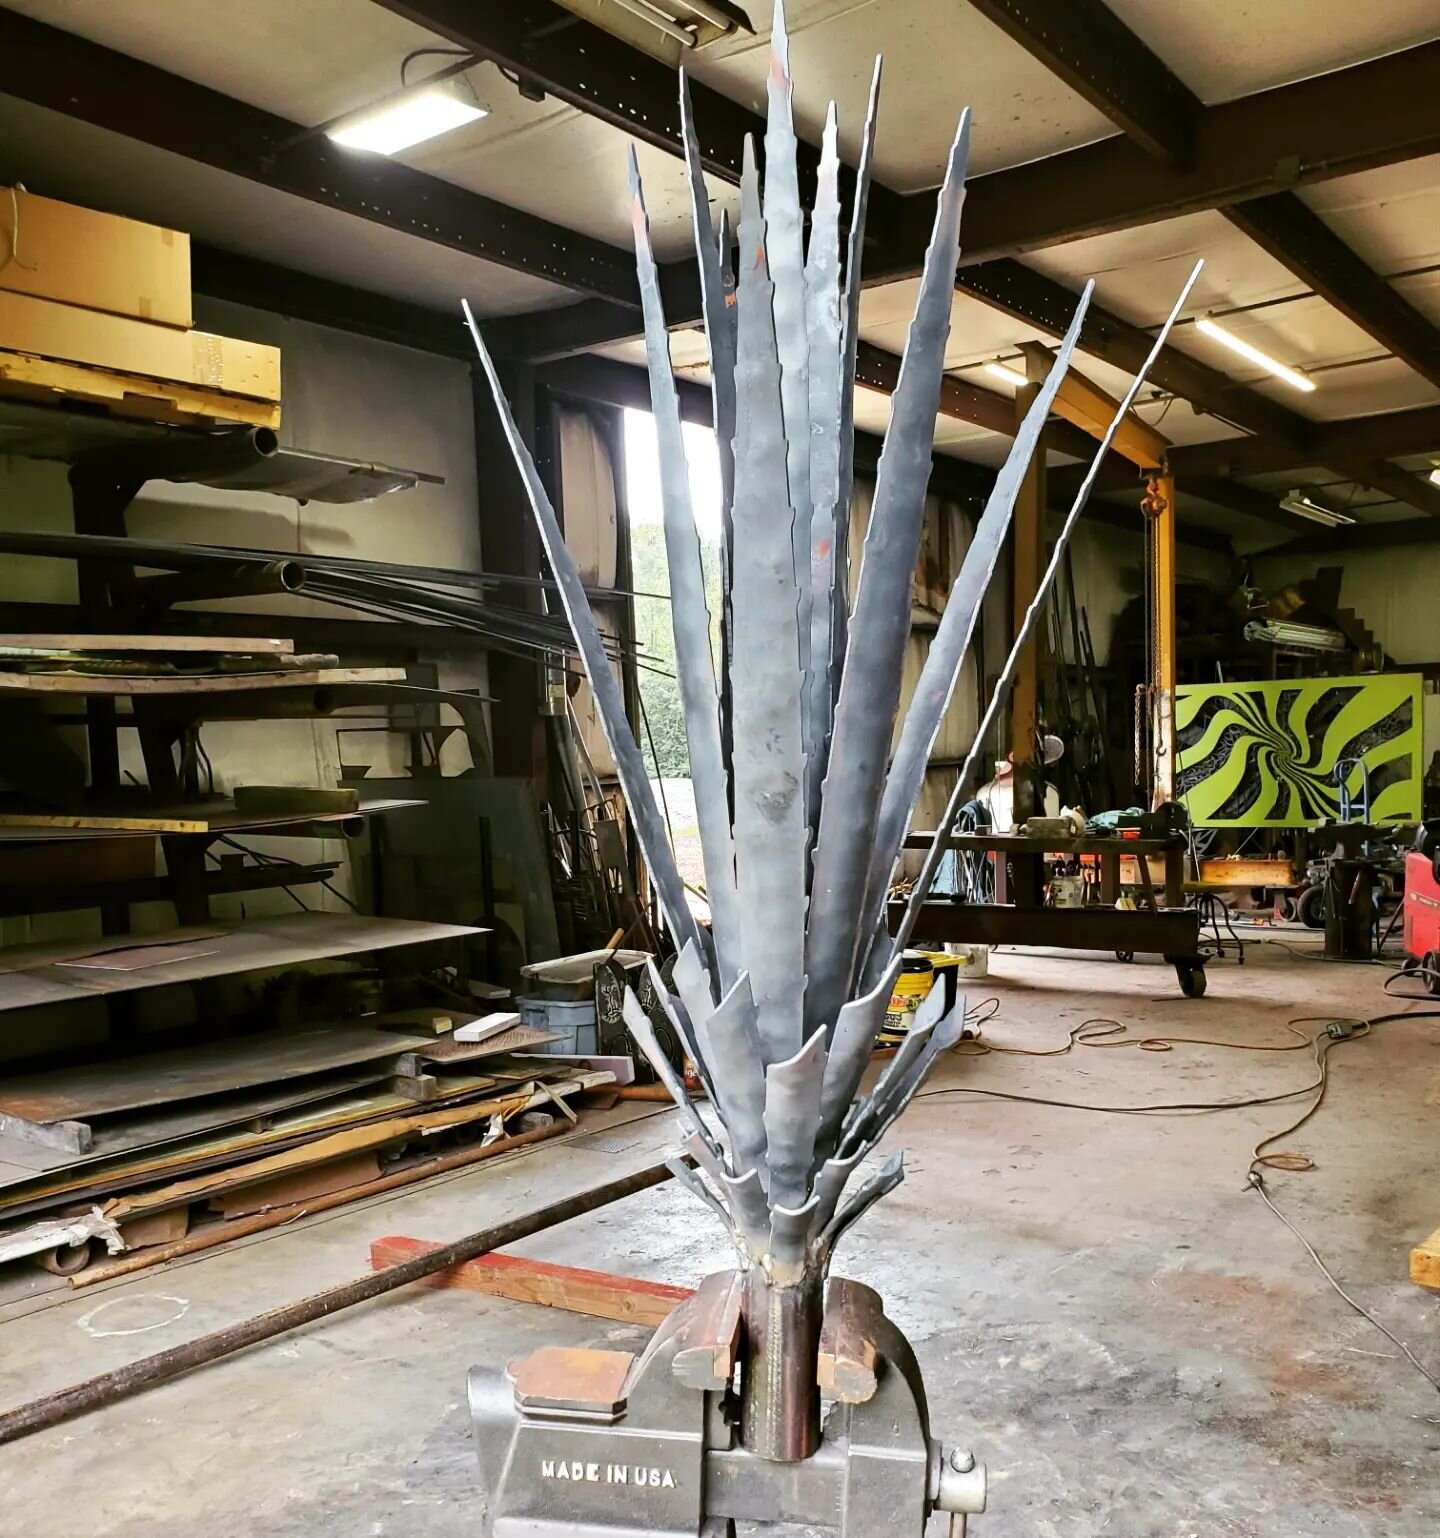 Lots of hammering and I have an almost complete agave. This and other garden sculptures will be available @ Cedarhurst Art and Craft Fair - Sept 9, 10, 11. Hope to see you there!

#cedarhurst #blacksmith #fabrication #desert #agave #plants #sculpture